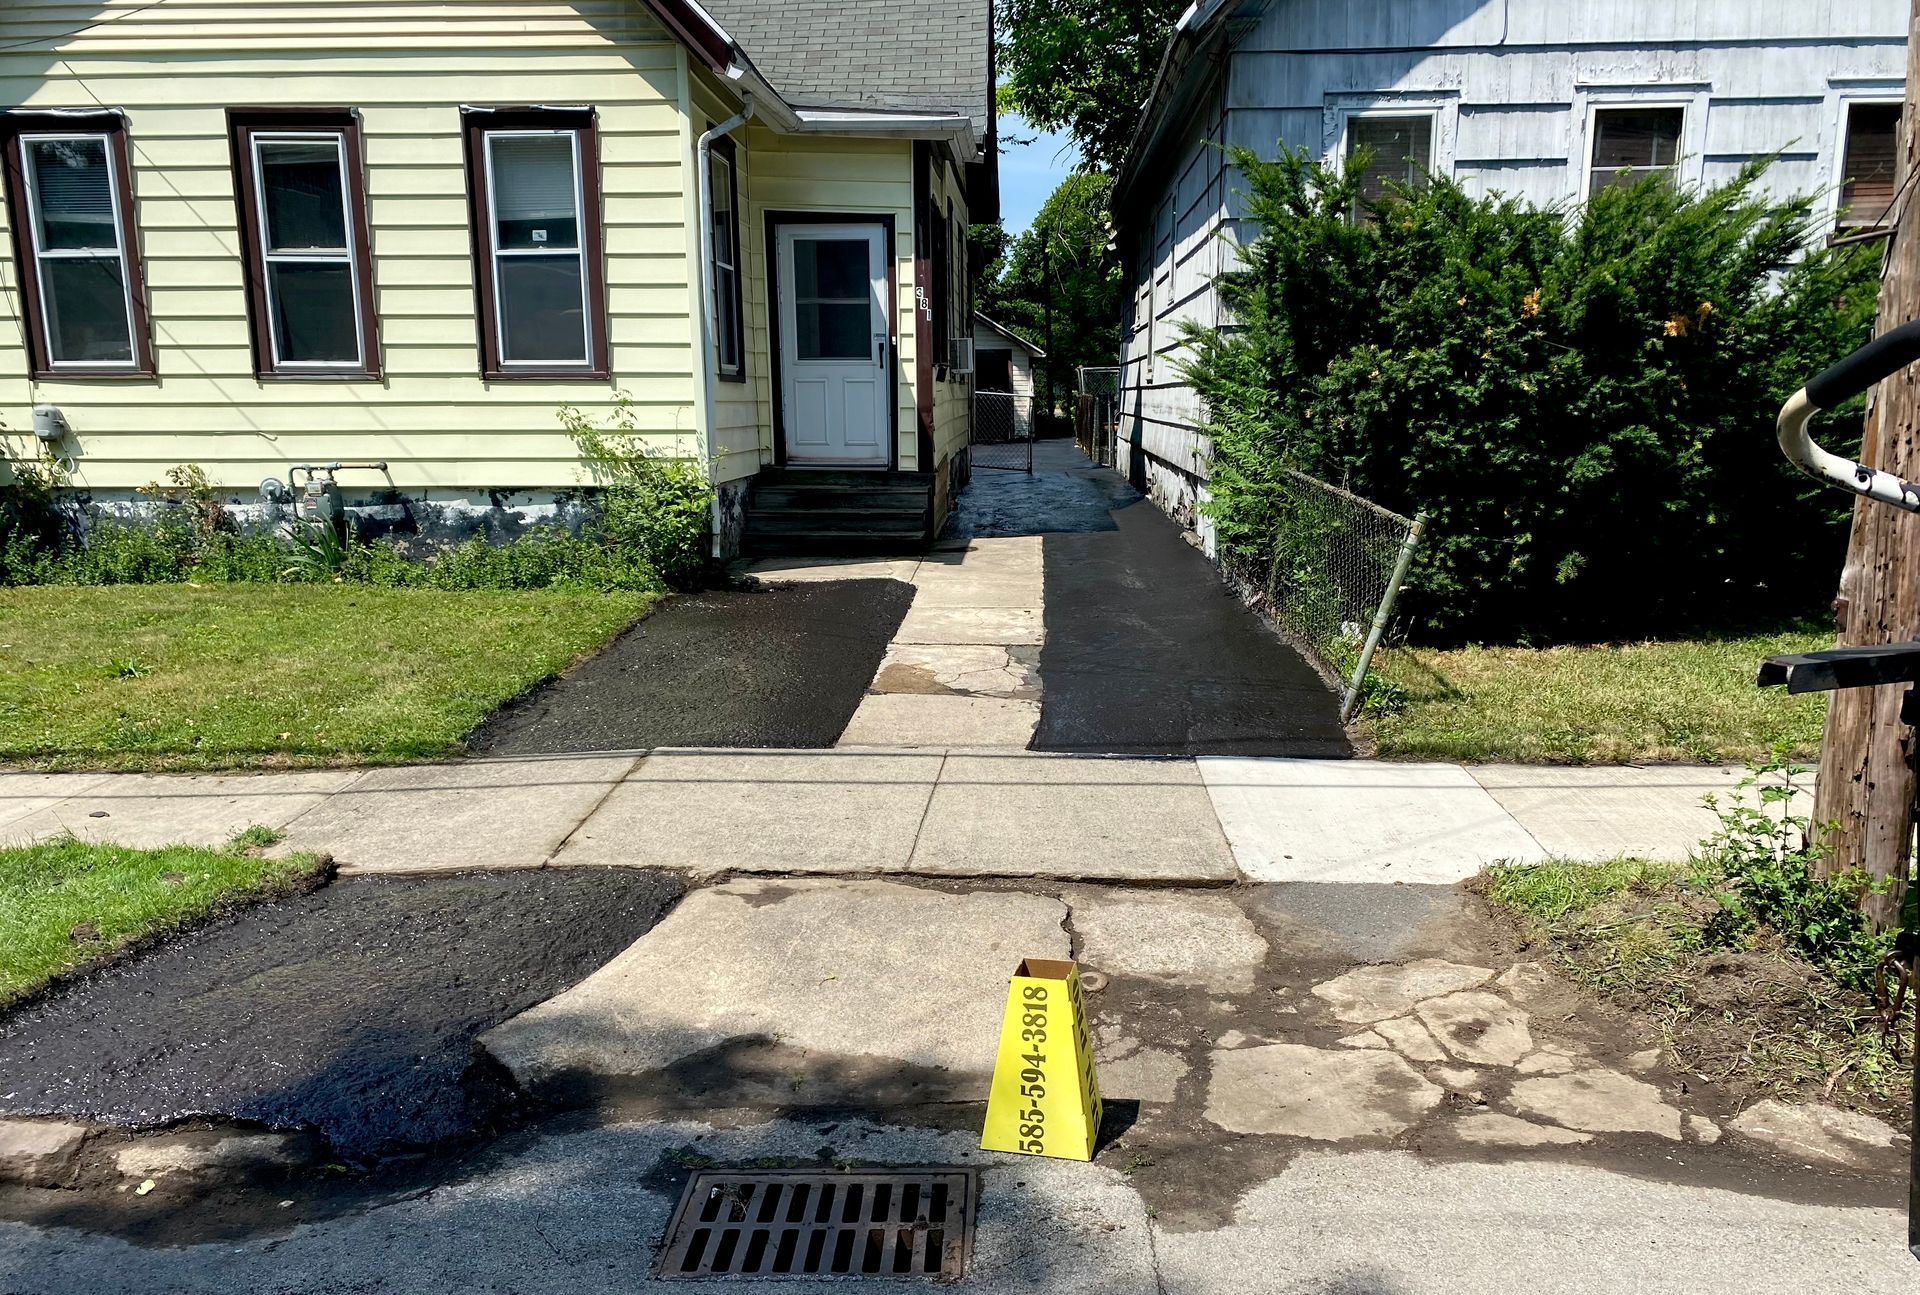 a yellow caution sign is on the sidewalk in front of a house